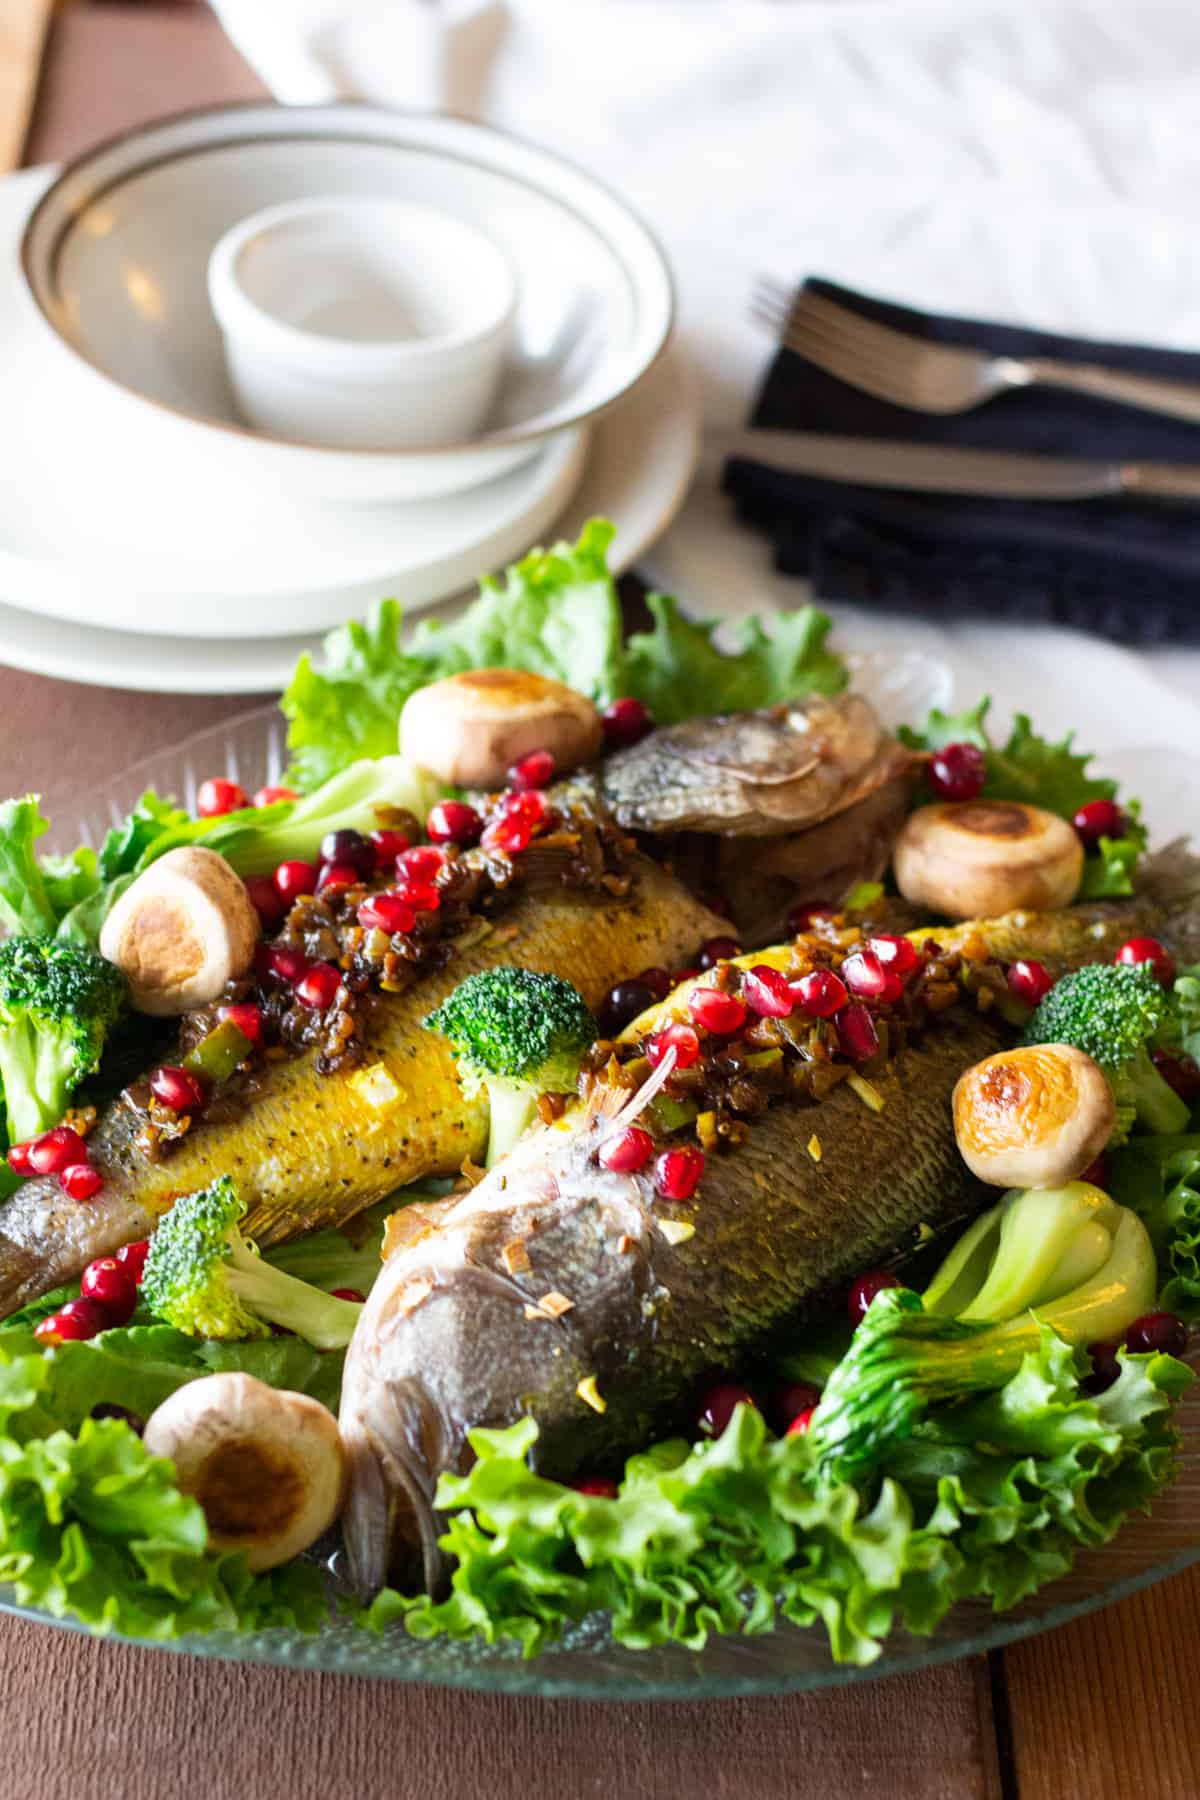 Persian Style stuffed branzino is a very special recipe that's bursting with amazing flavors. The filling includes walnuts and pomegranates which gives it a great crunch and taste!